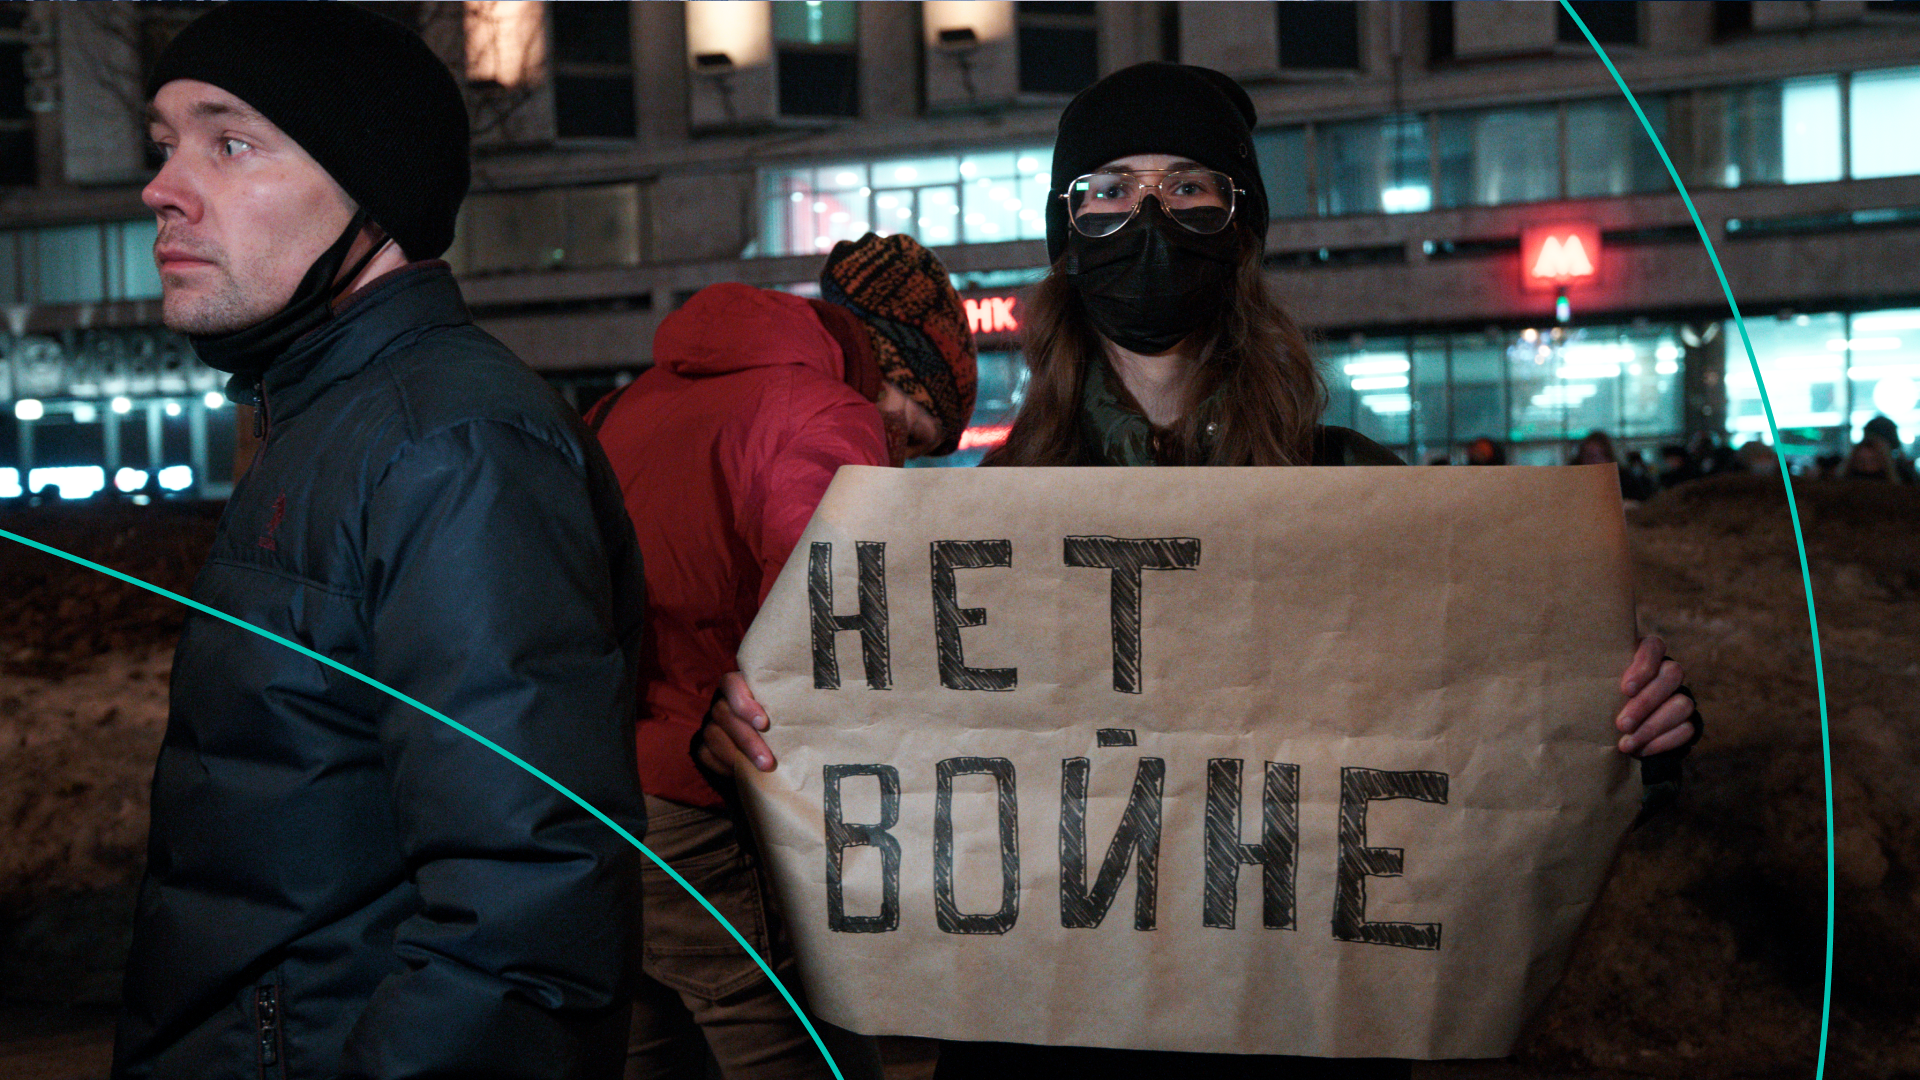 Moscow protests against the invasion of Ukraine